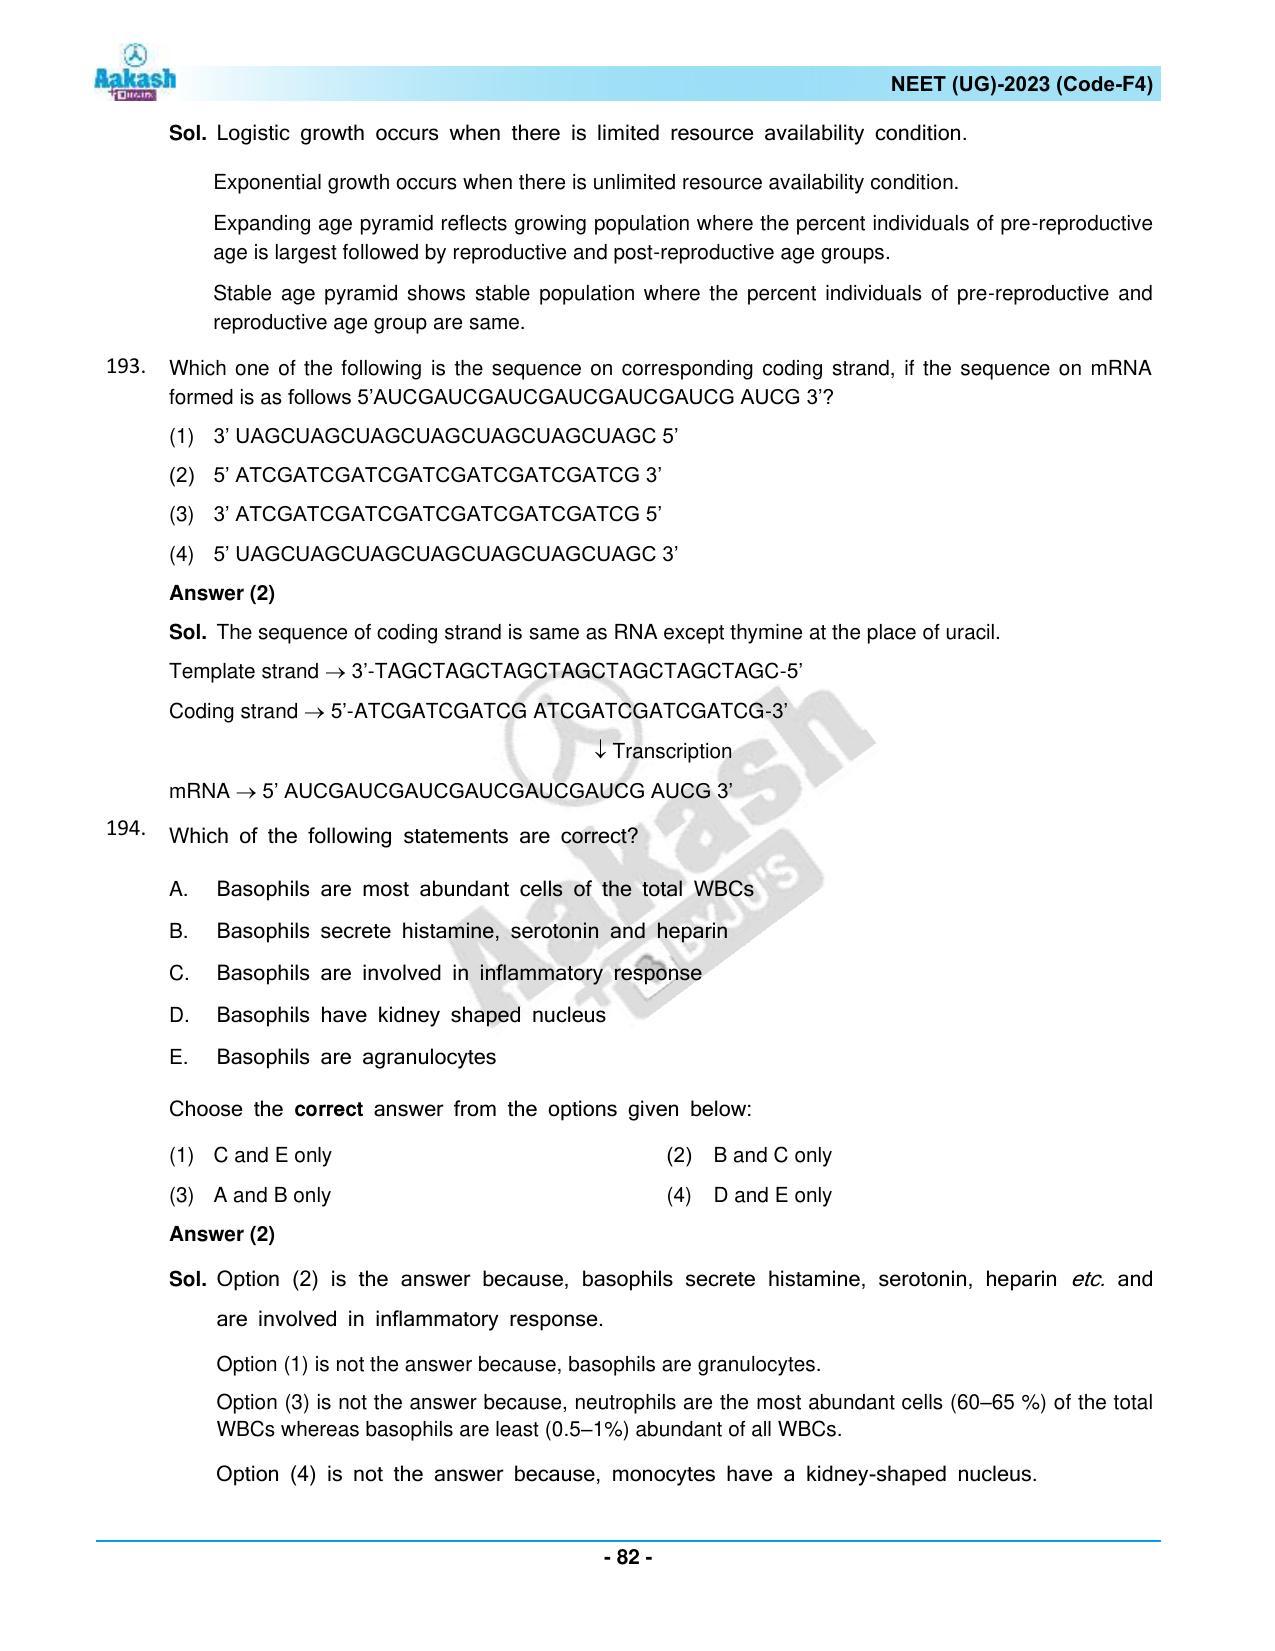 NEET 2023 Question Paper F4 - Page 82